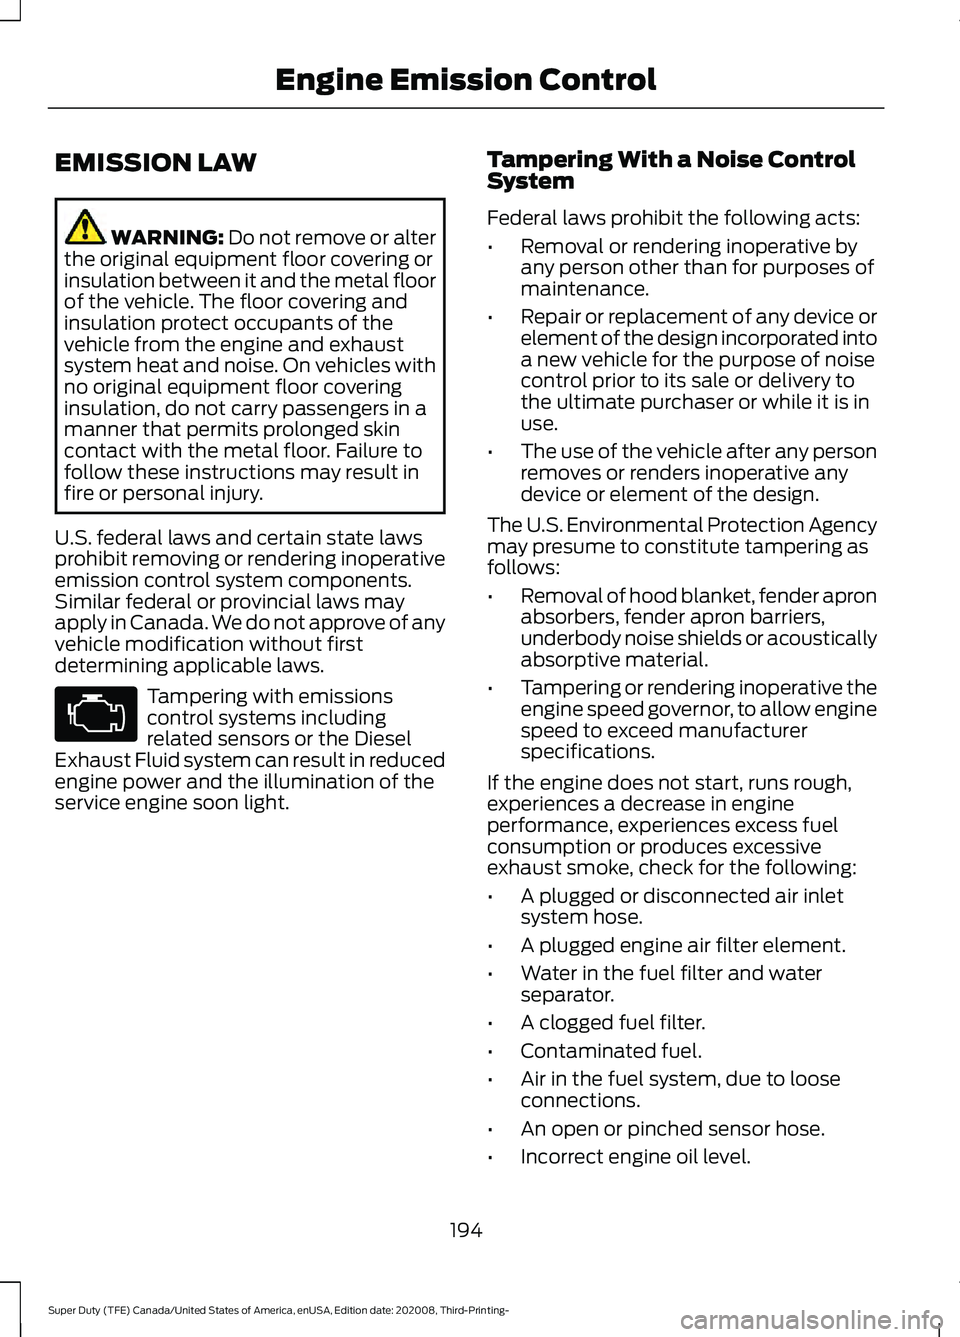 FORD F-450 2021  Owners Manual EMISSION LAW
WARNING: Do not remove or alter
the original equipment floor covering or
insulation between it and the metal floor
of the vehicle. The floor covering and
insulation protect occupants of t